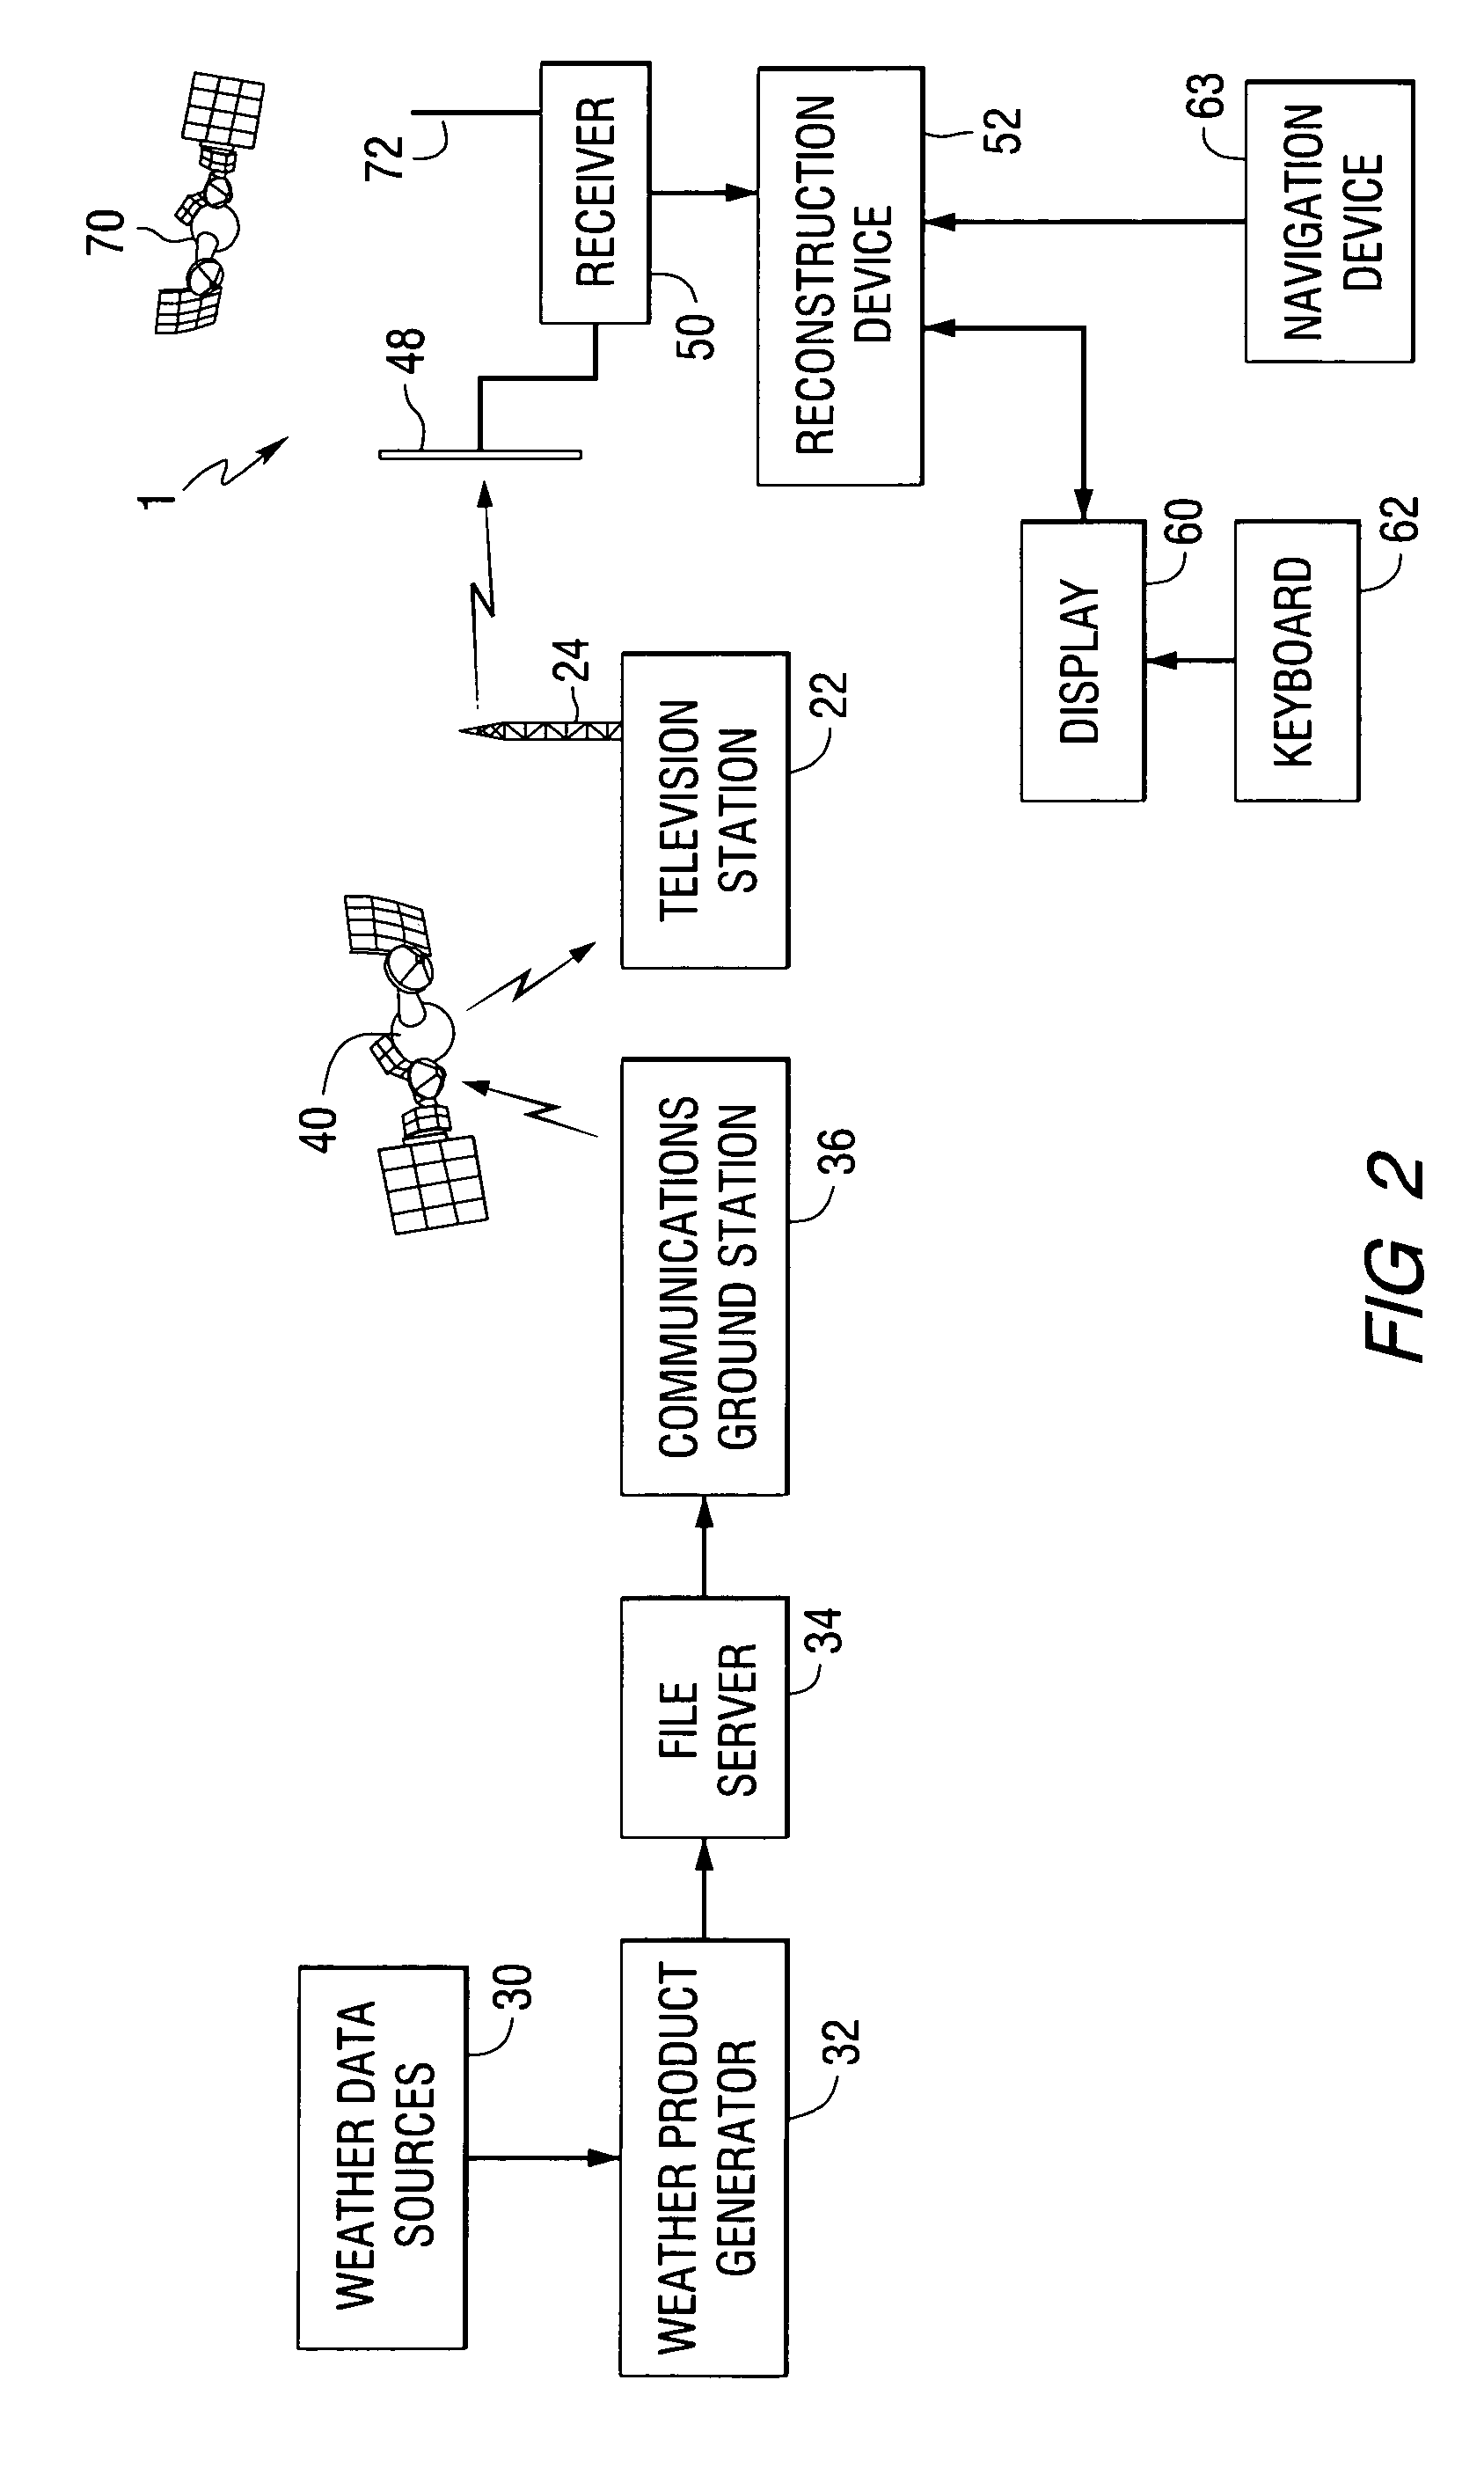 Weather information dissemination system for mobile vehicles